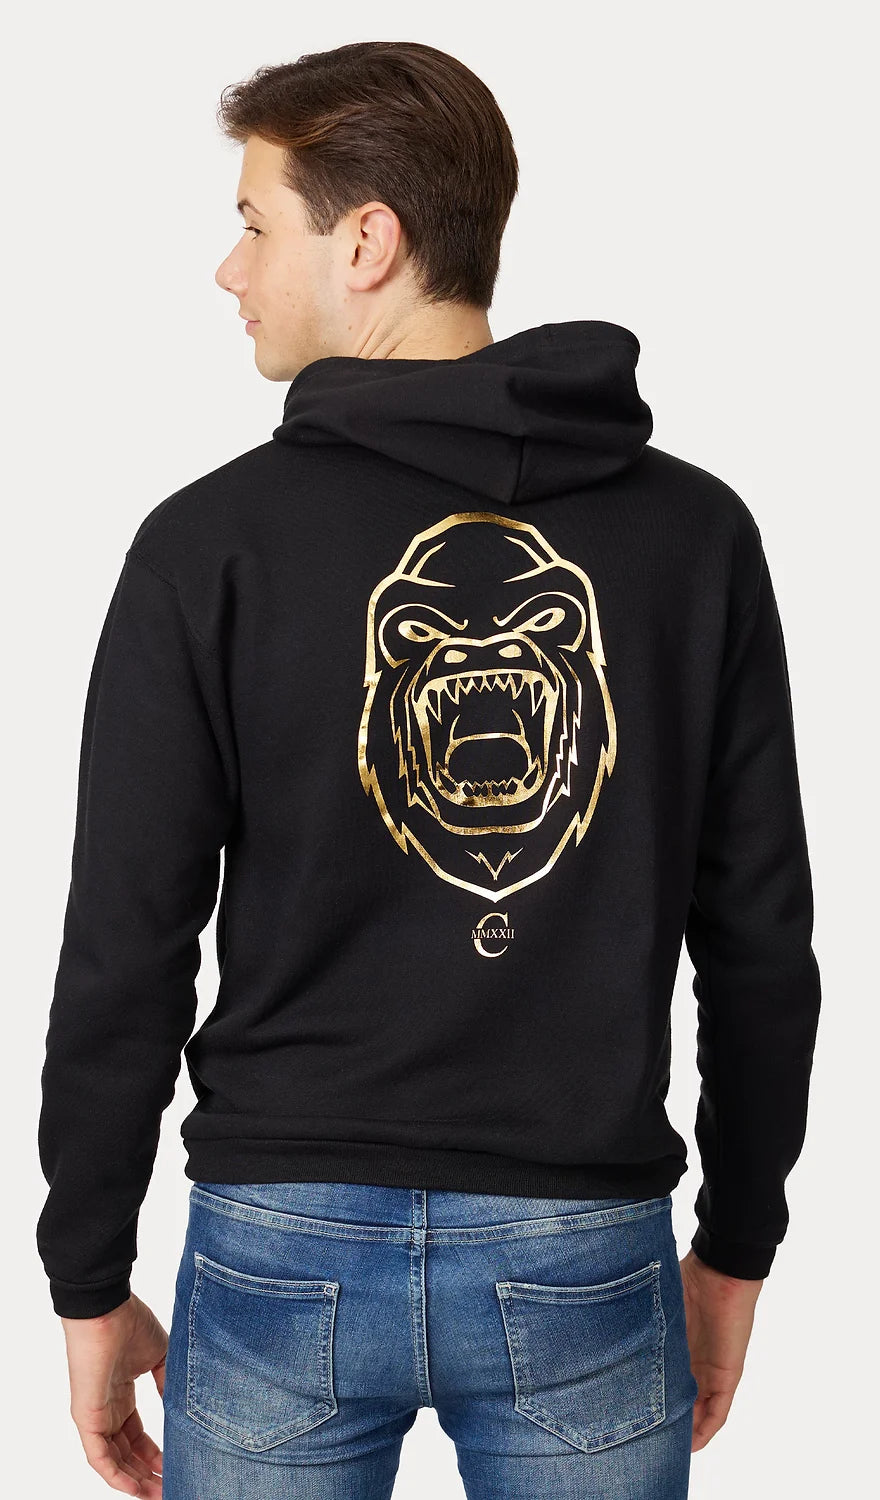 The Charlie The Gorilla Hoodie